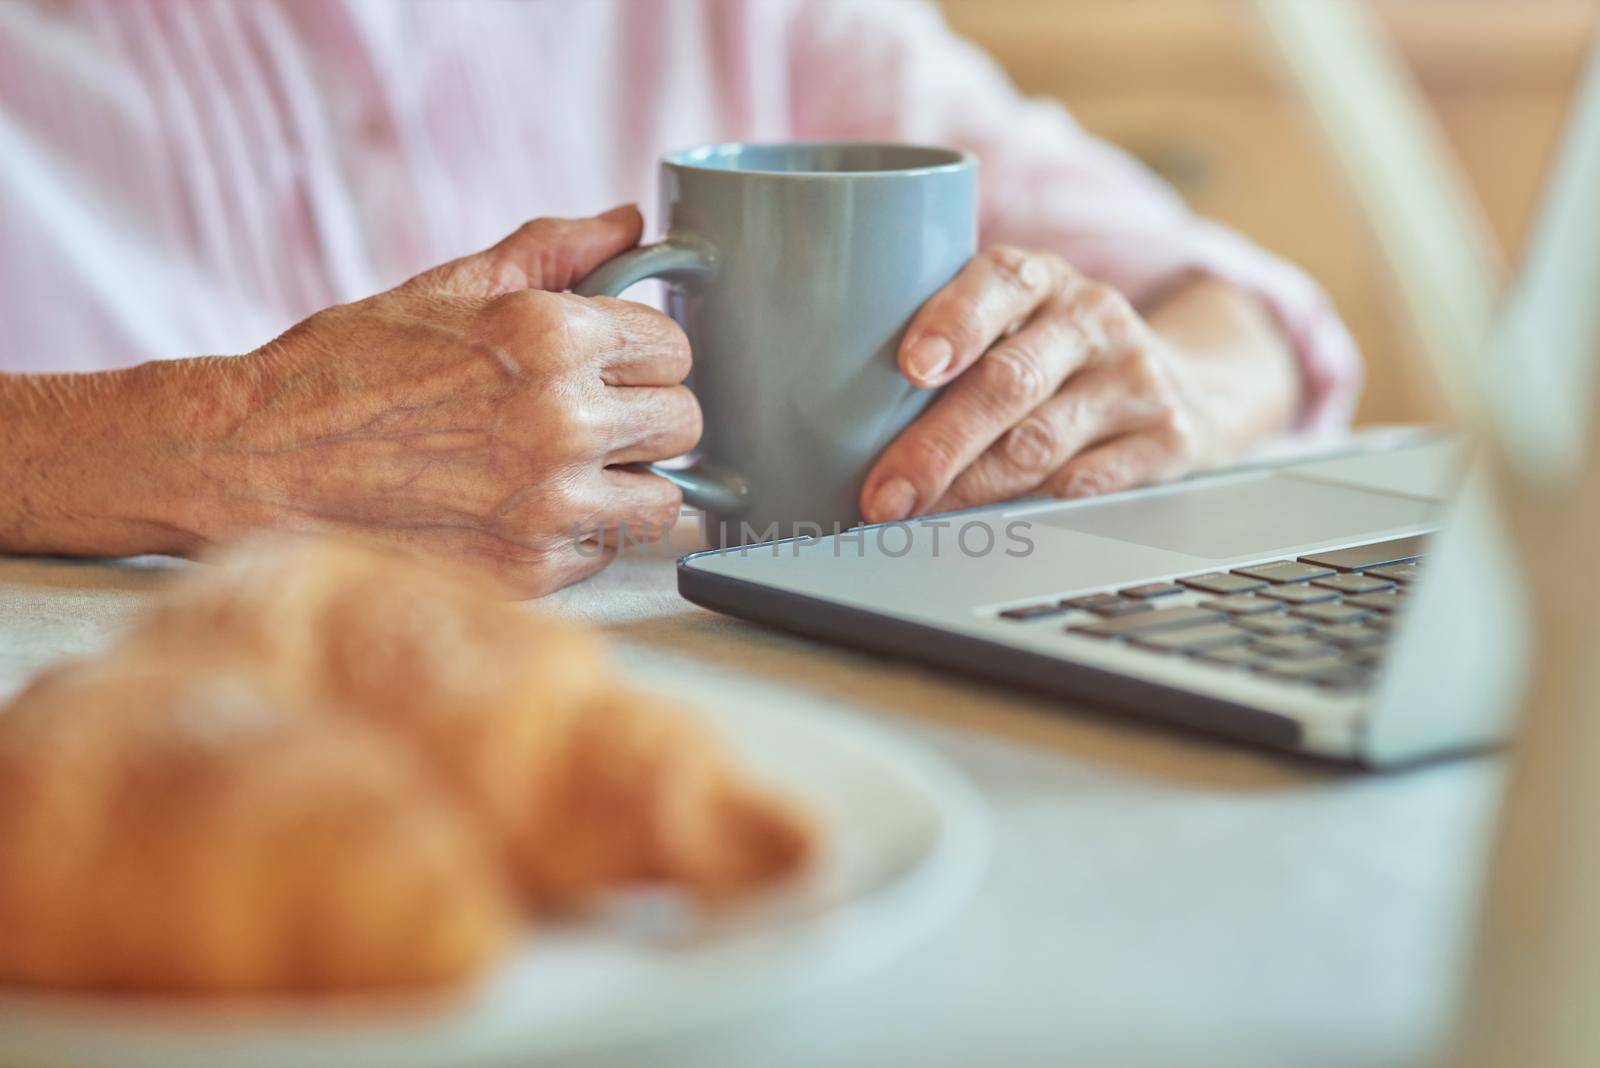 Cropped photo of senior lady holding coffee and using laptop during breakfast in the morning. Domestic lifestyle concept